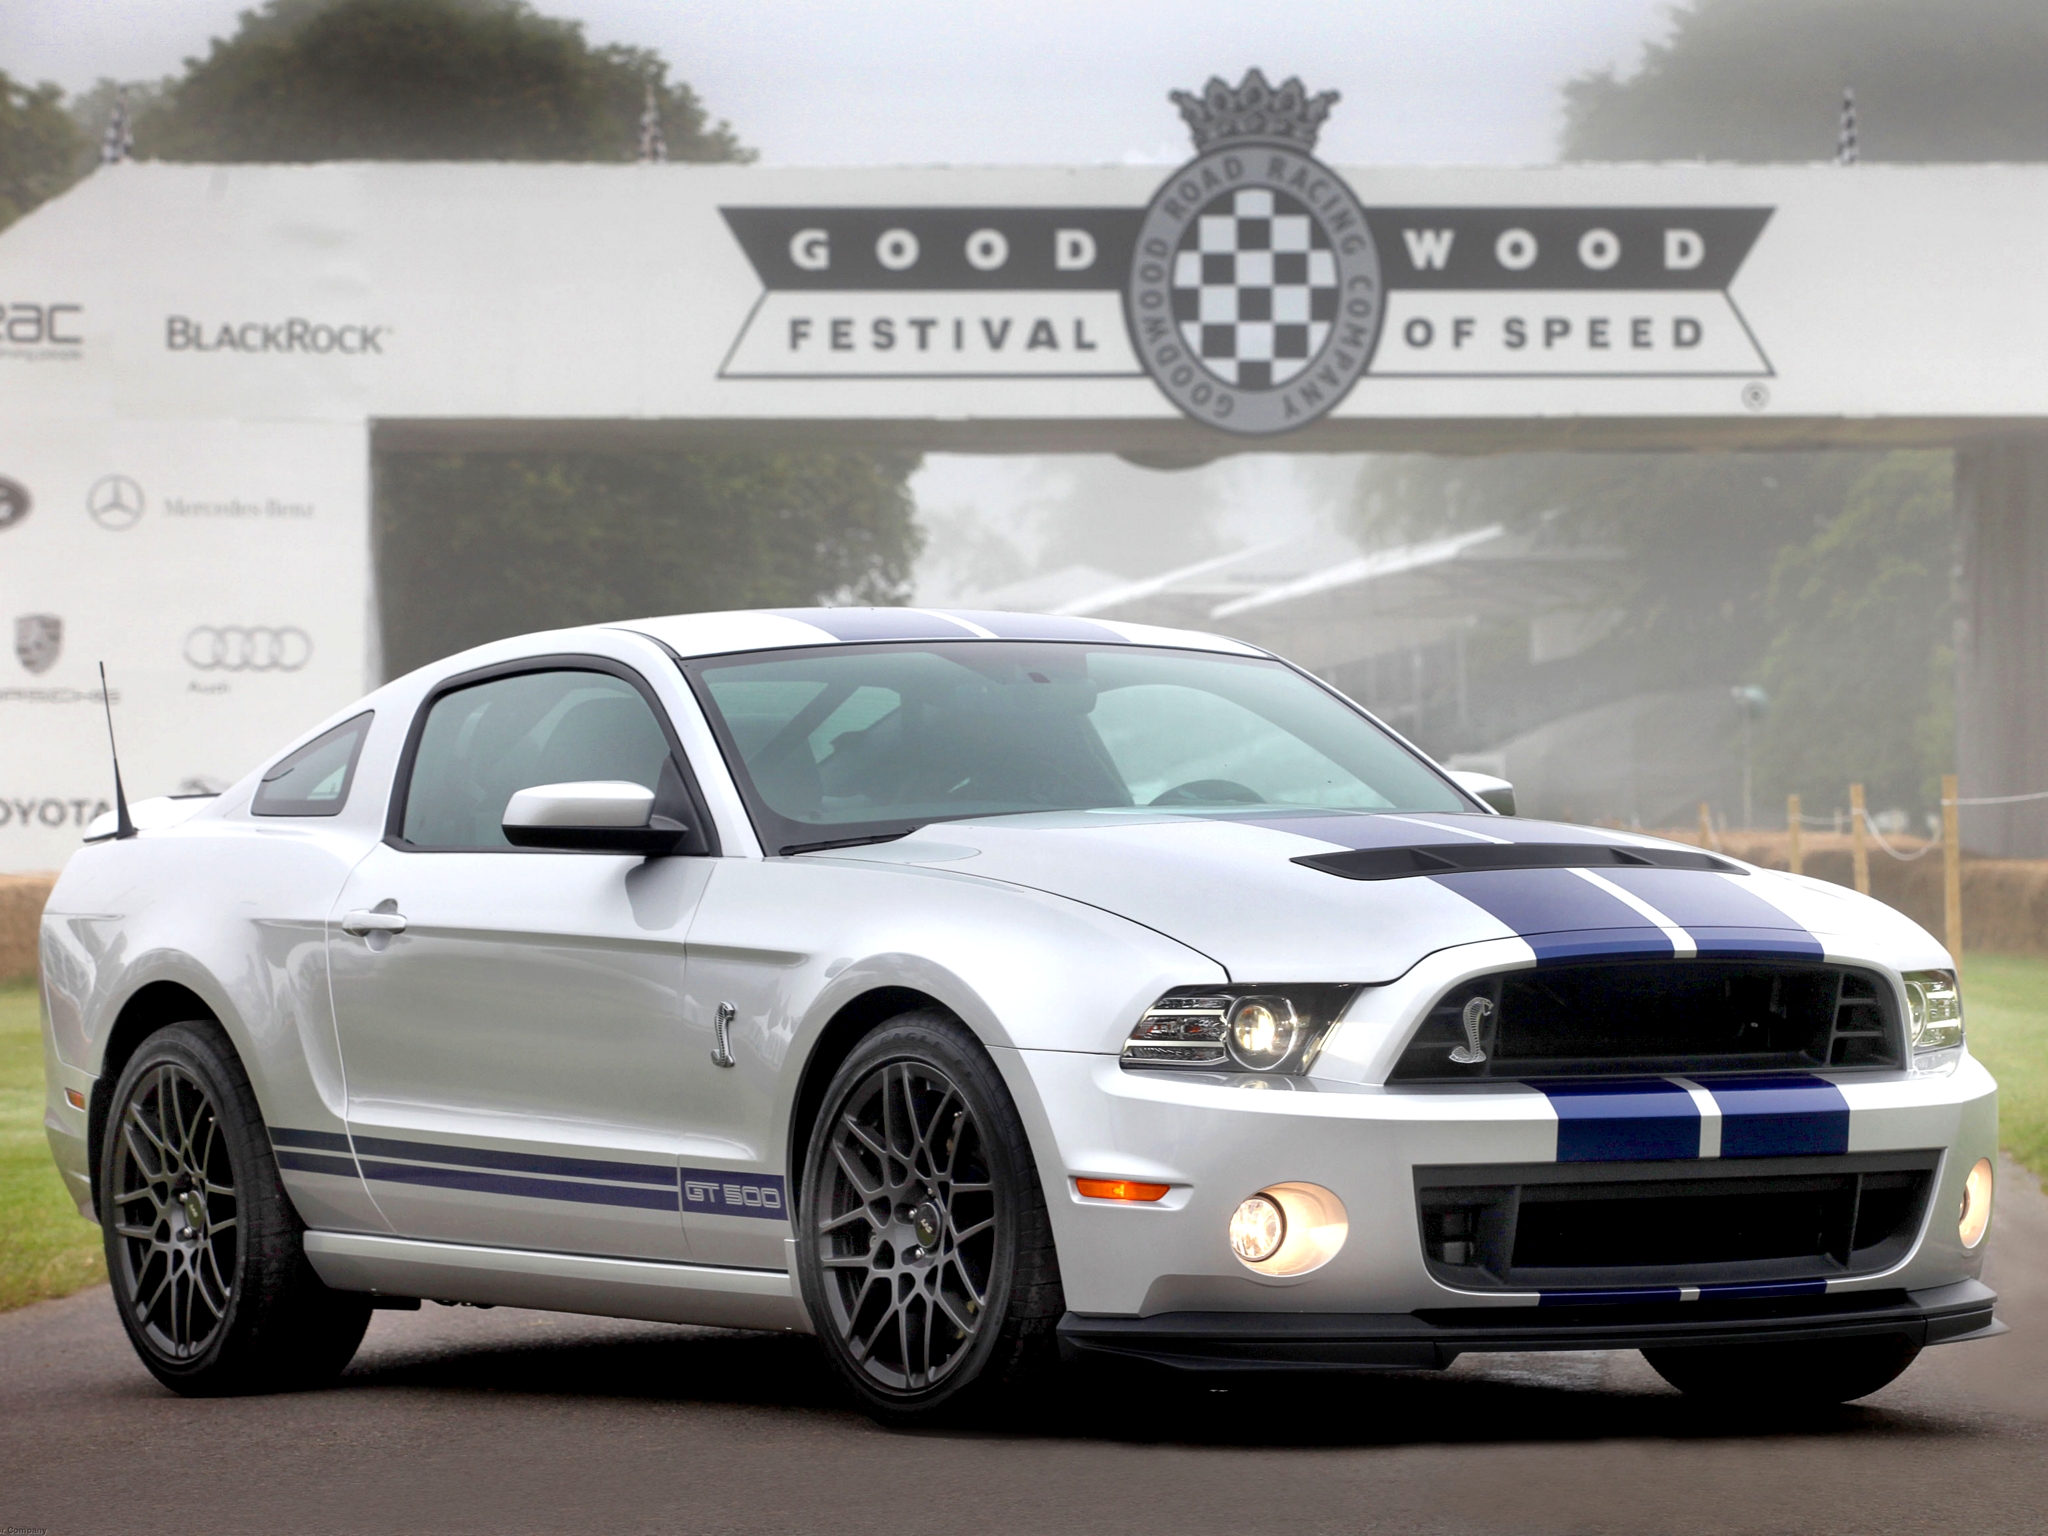 2012, Shelby, Gt500, Svt, Ford, Mustang, Muscle Wallpaper